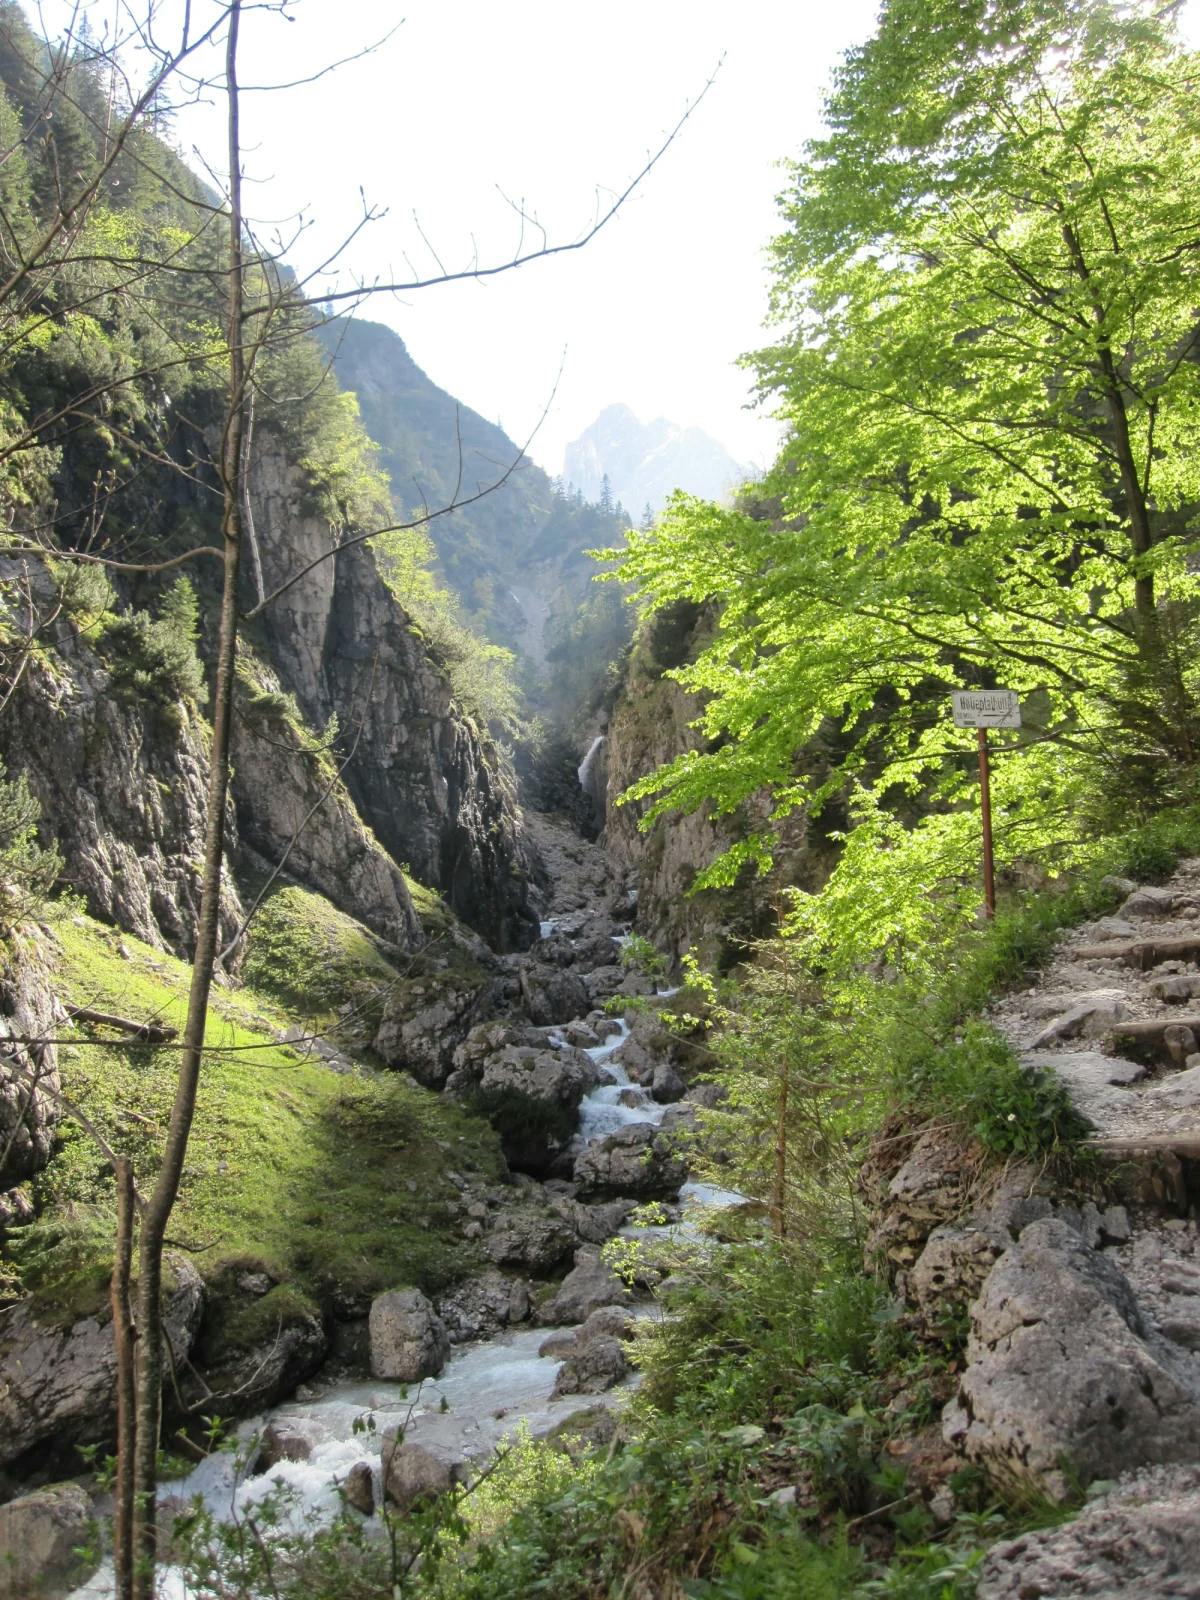 A scenic area with green trees and a stream of water through a rocky valley